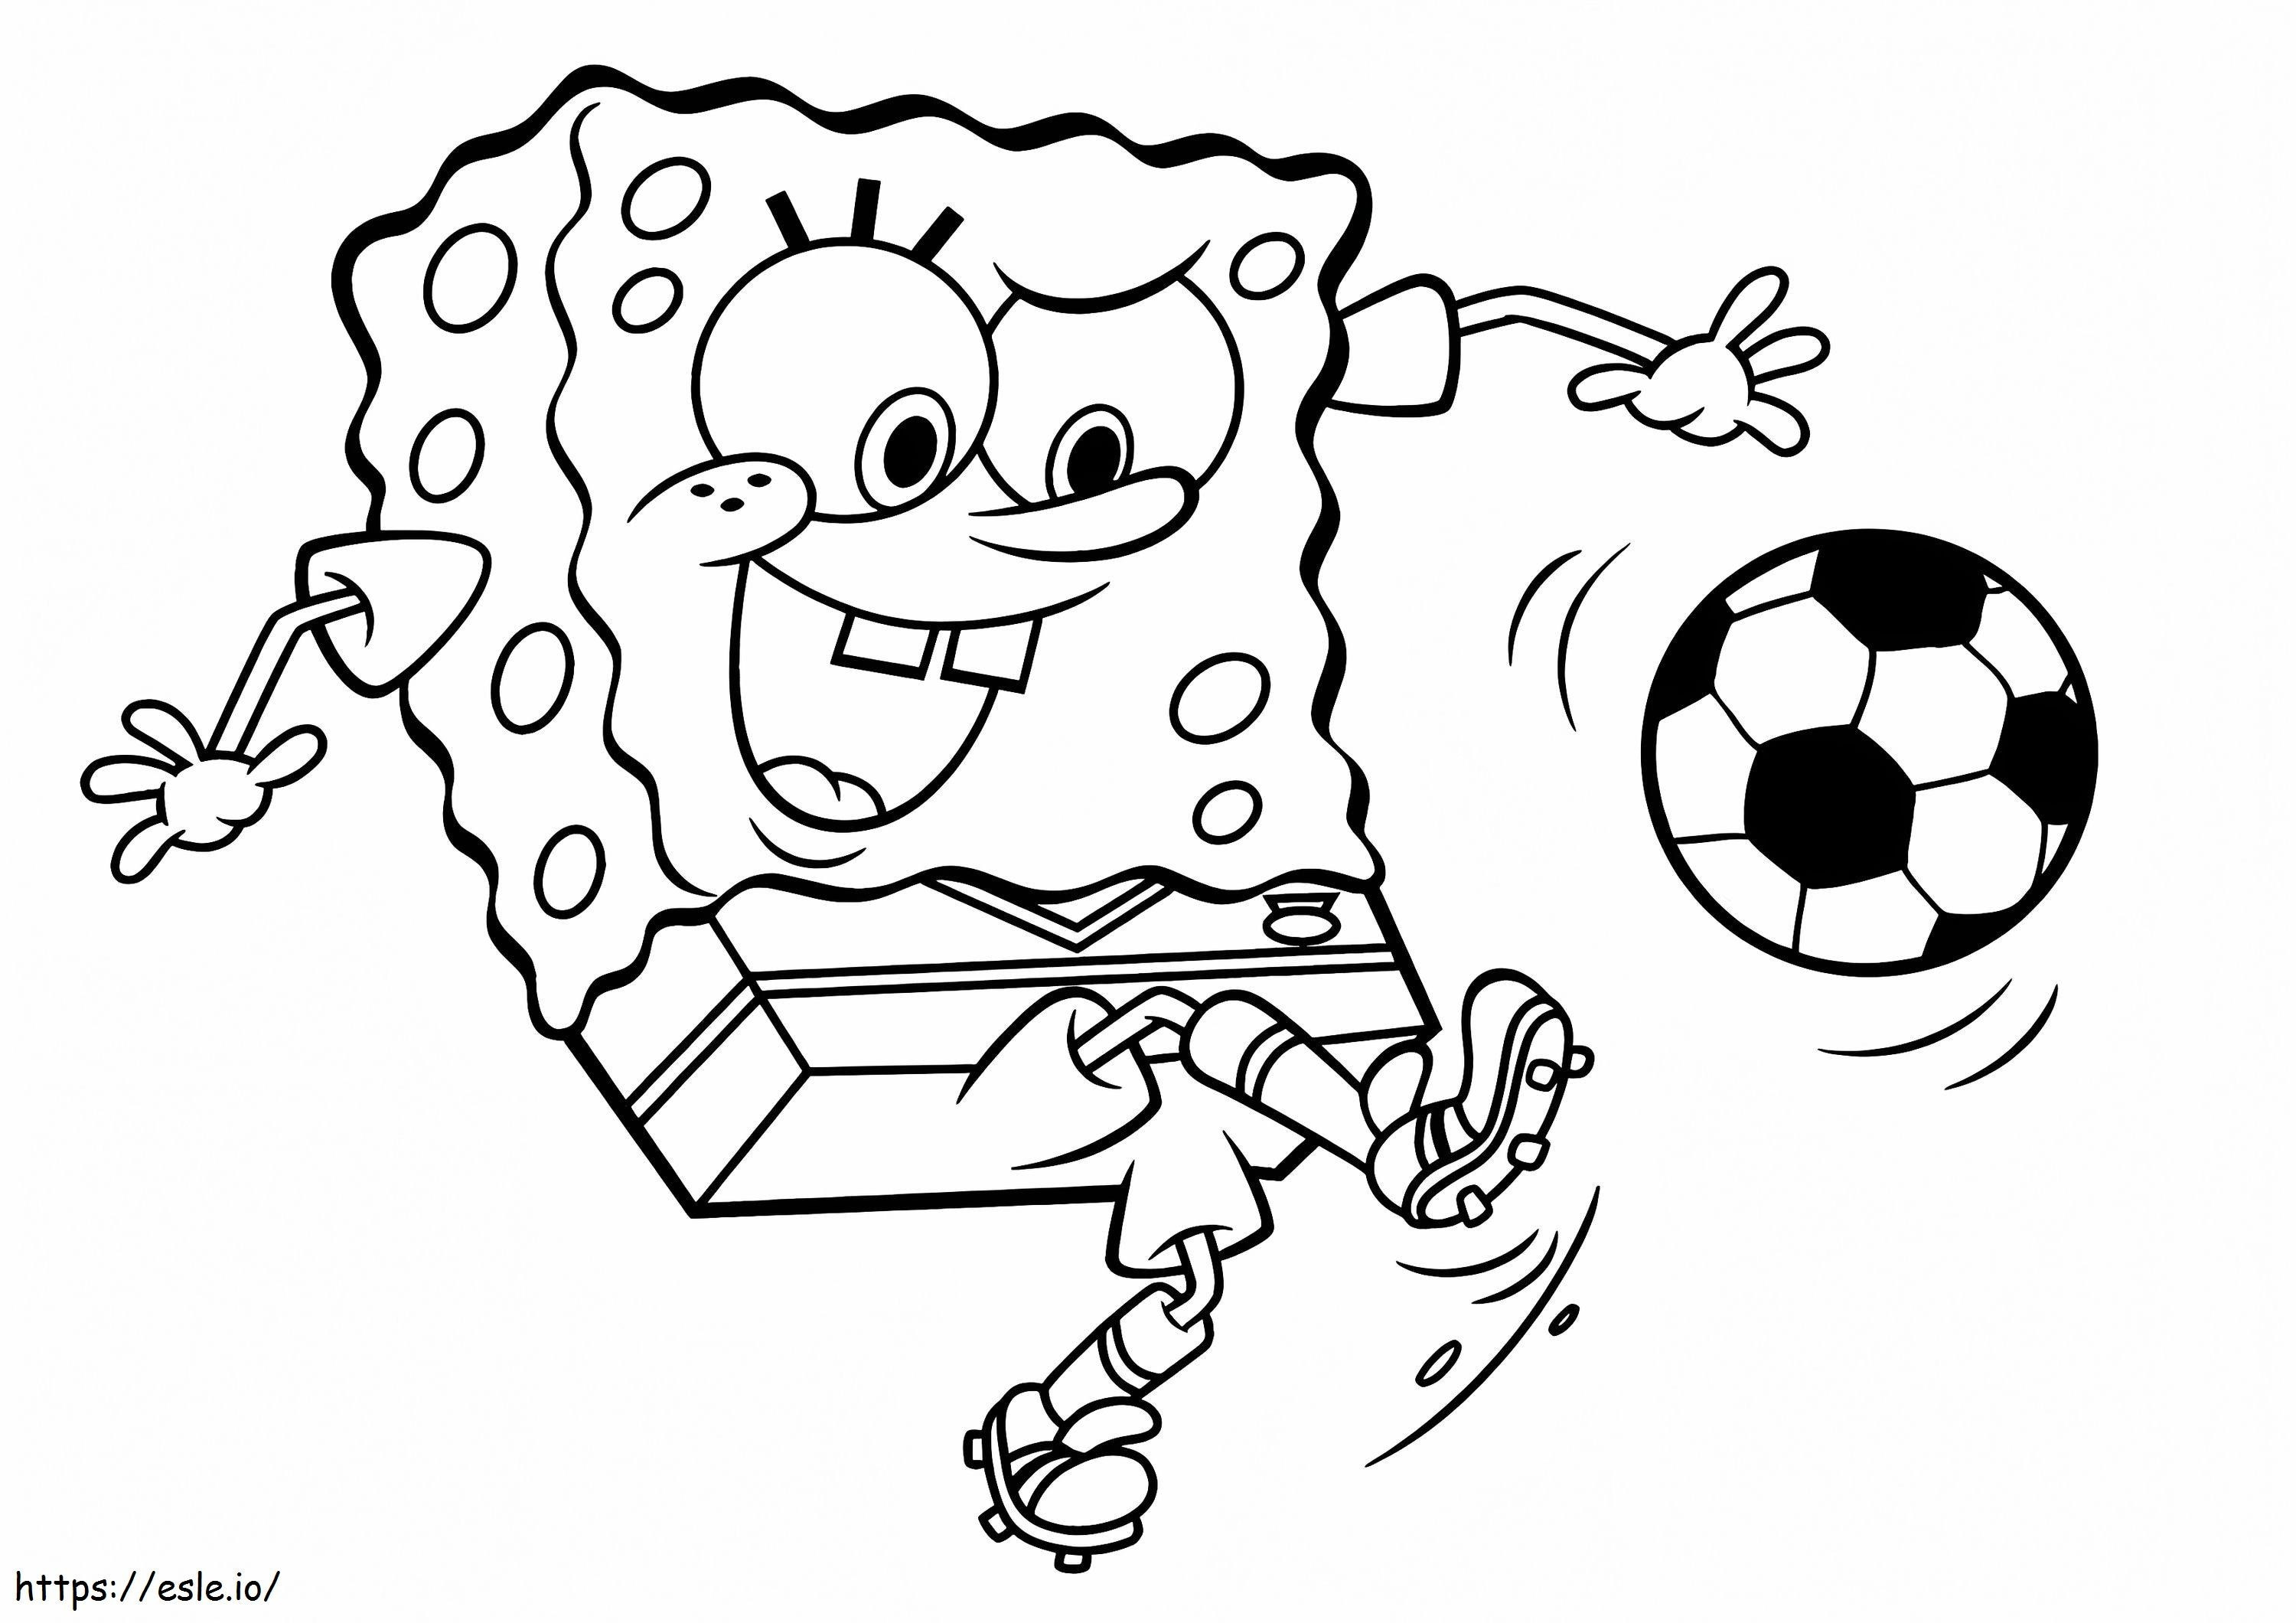 1526205402 The Spongebob Squarepants With Soccer Ball A4 E1600676785393 coloring page